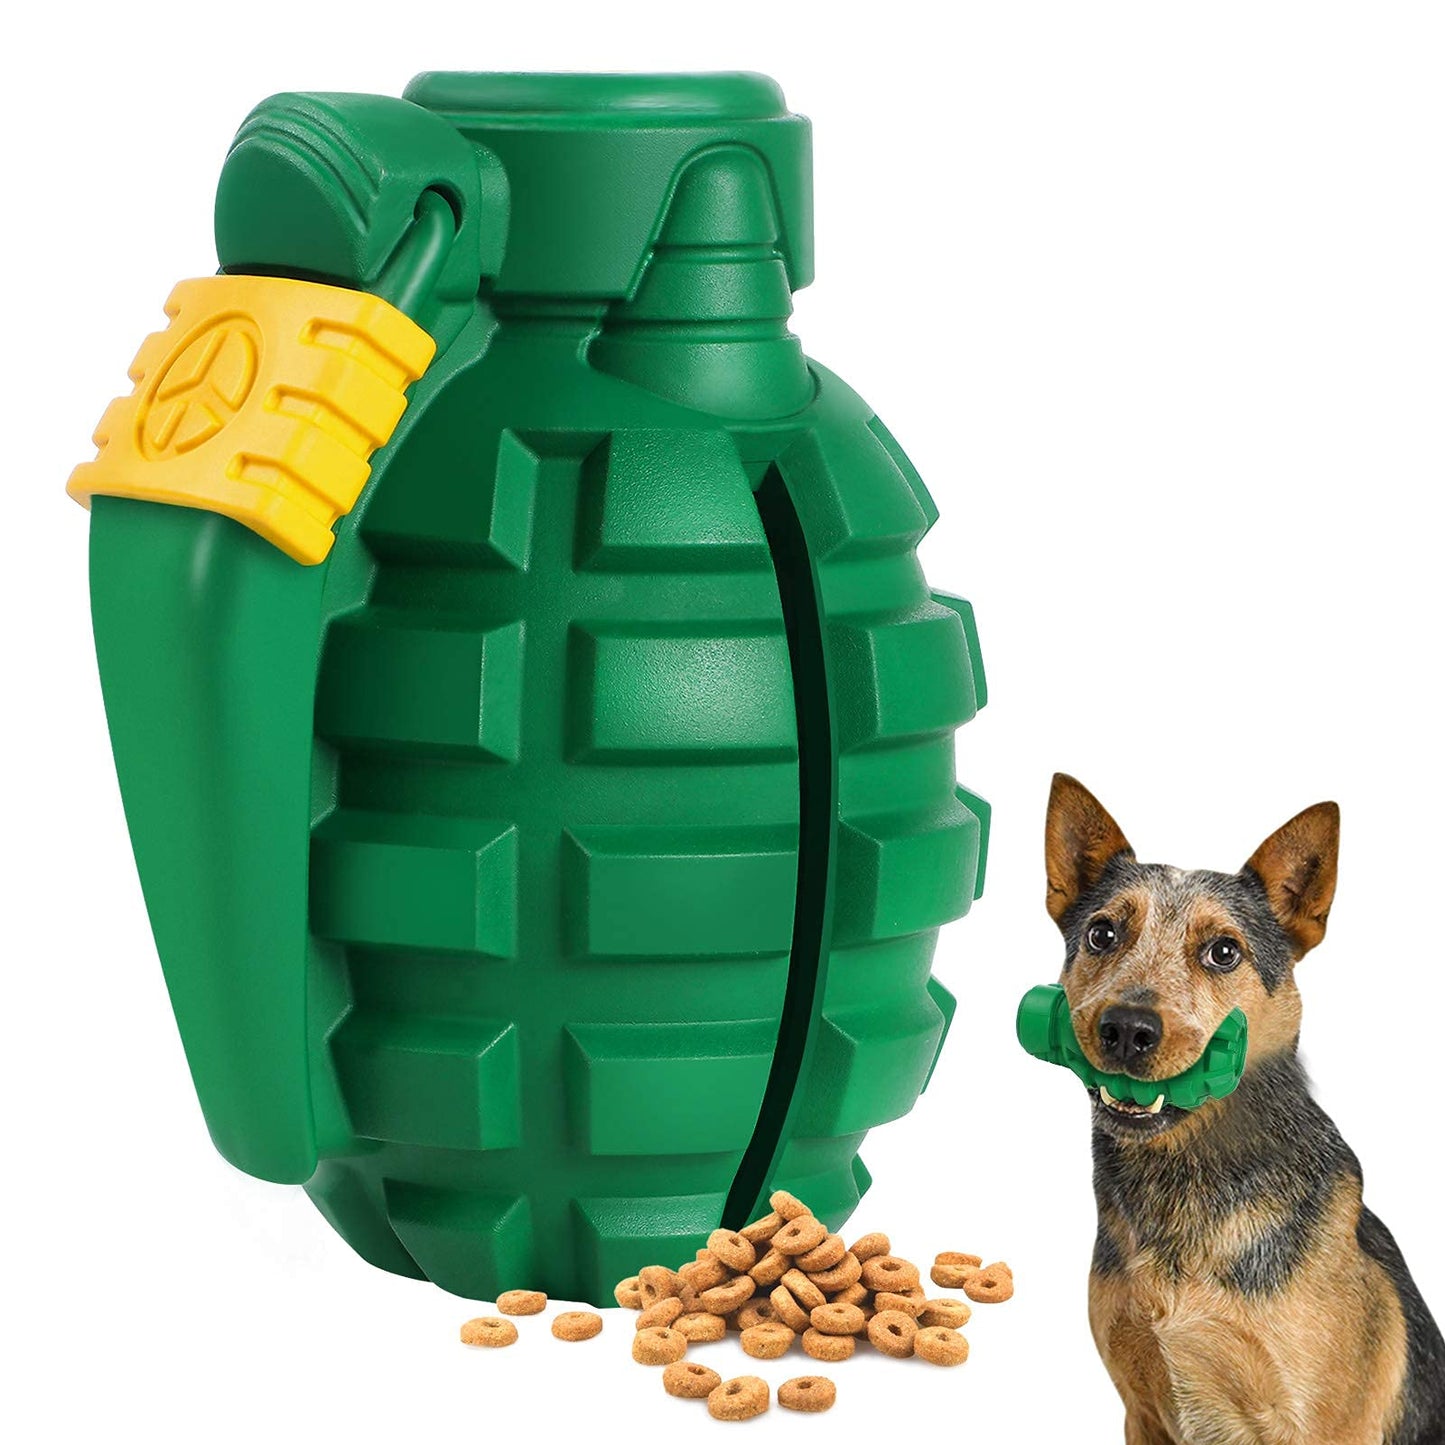 Indestructible Dog Chew Toy - Large Breed Durable